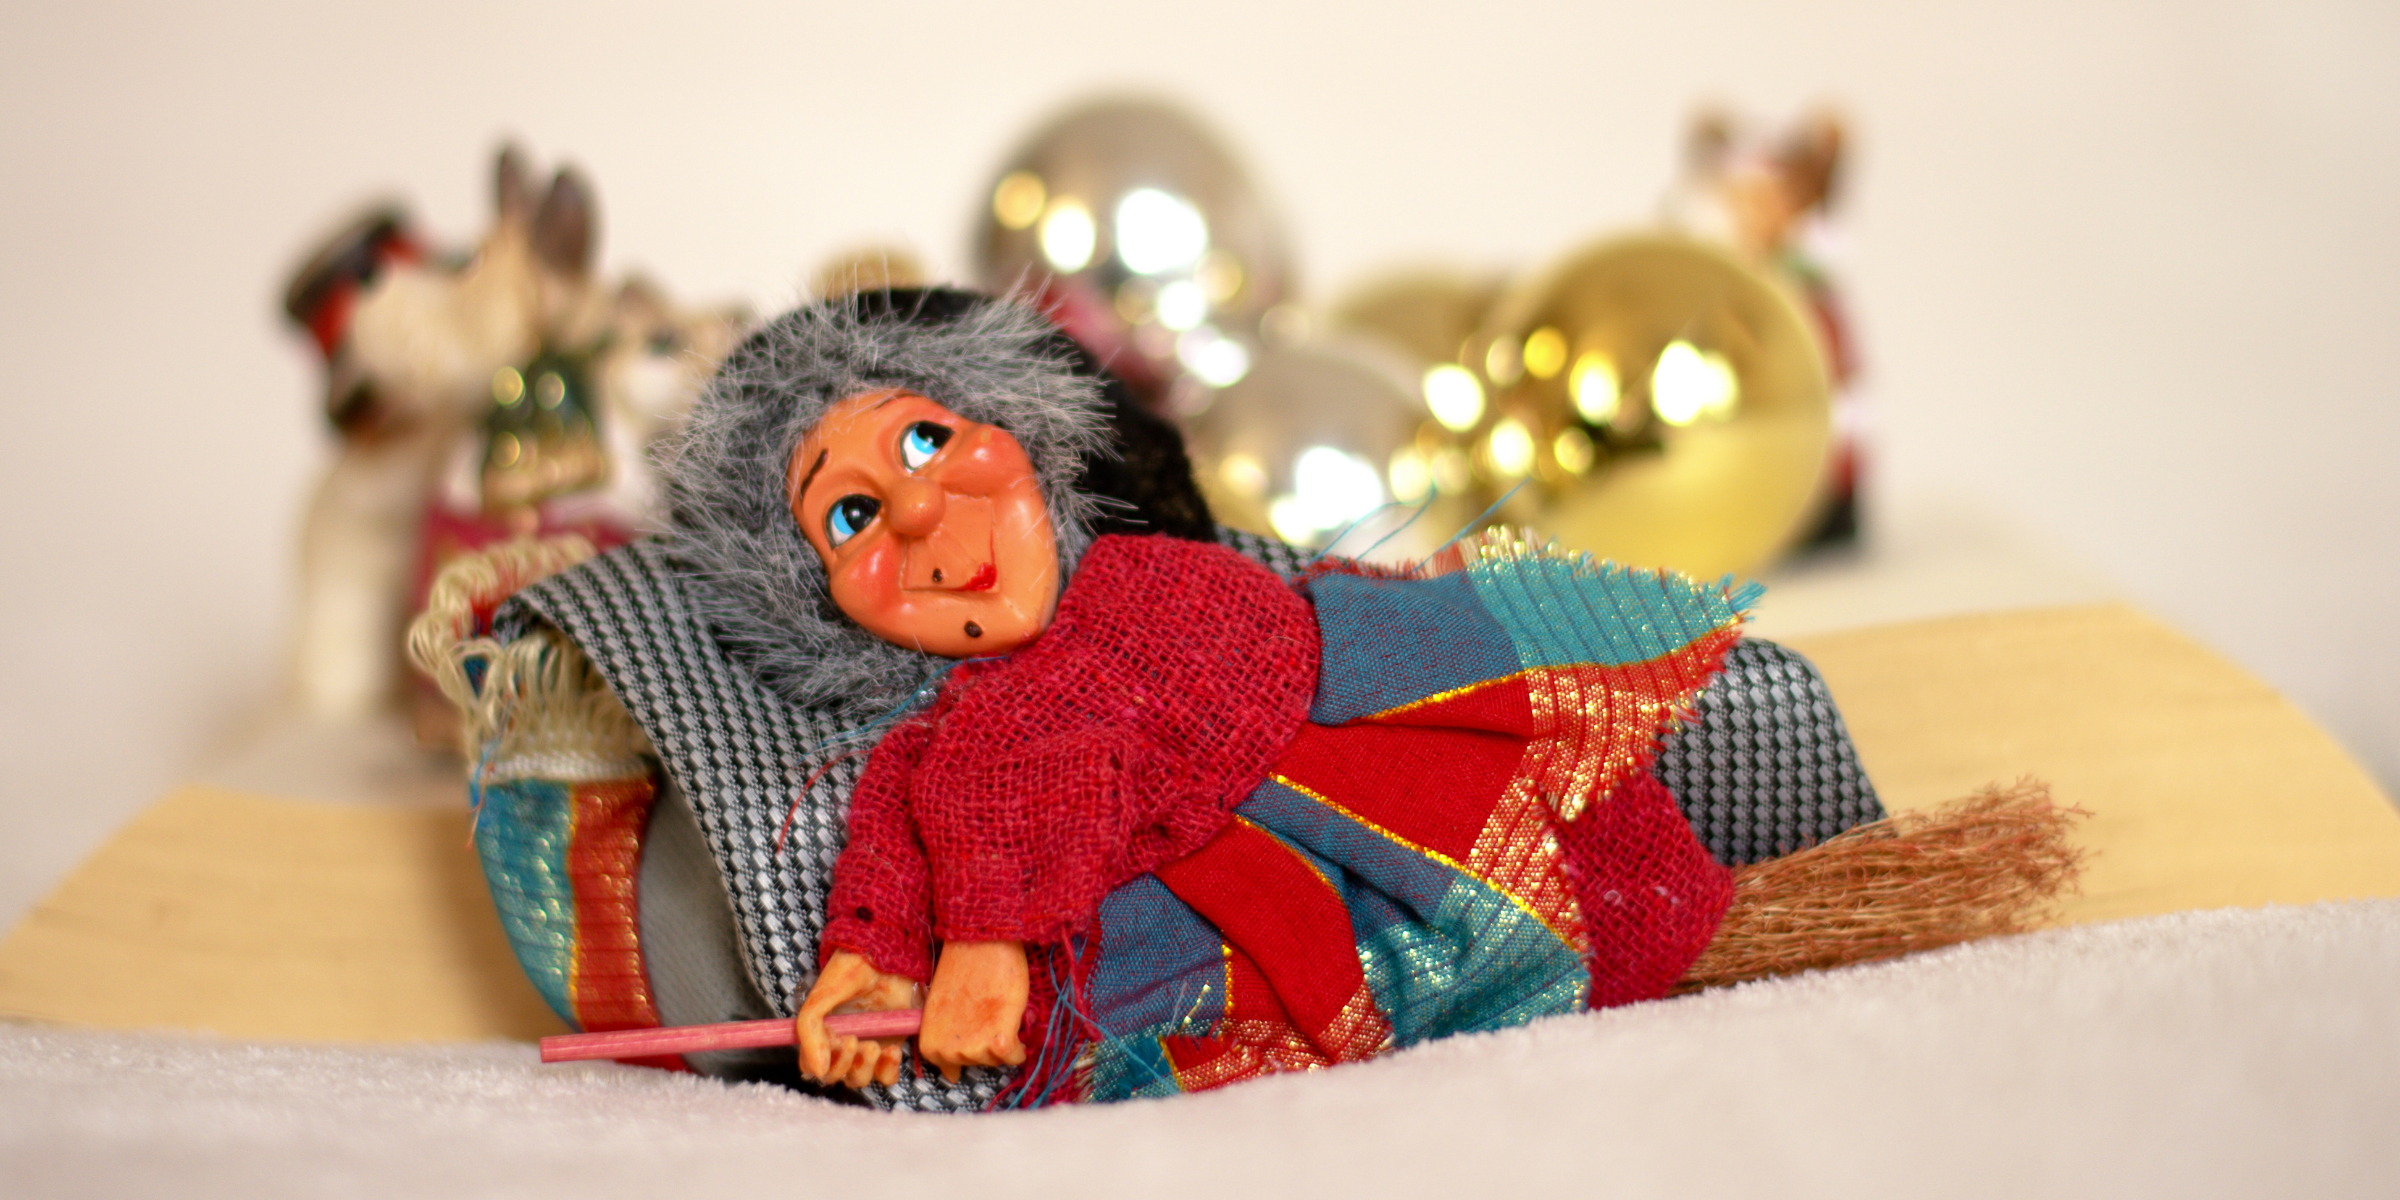 Who is the Befana Christmas witch?